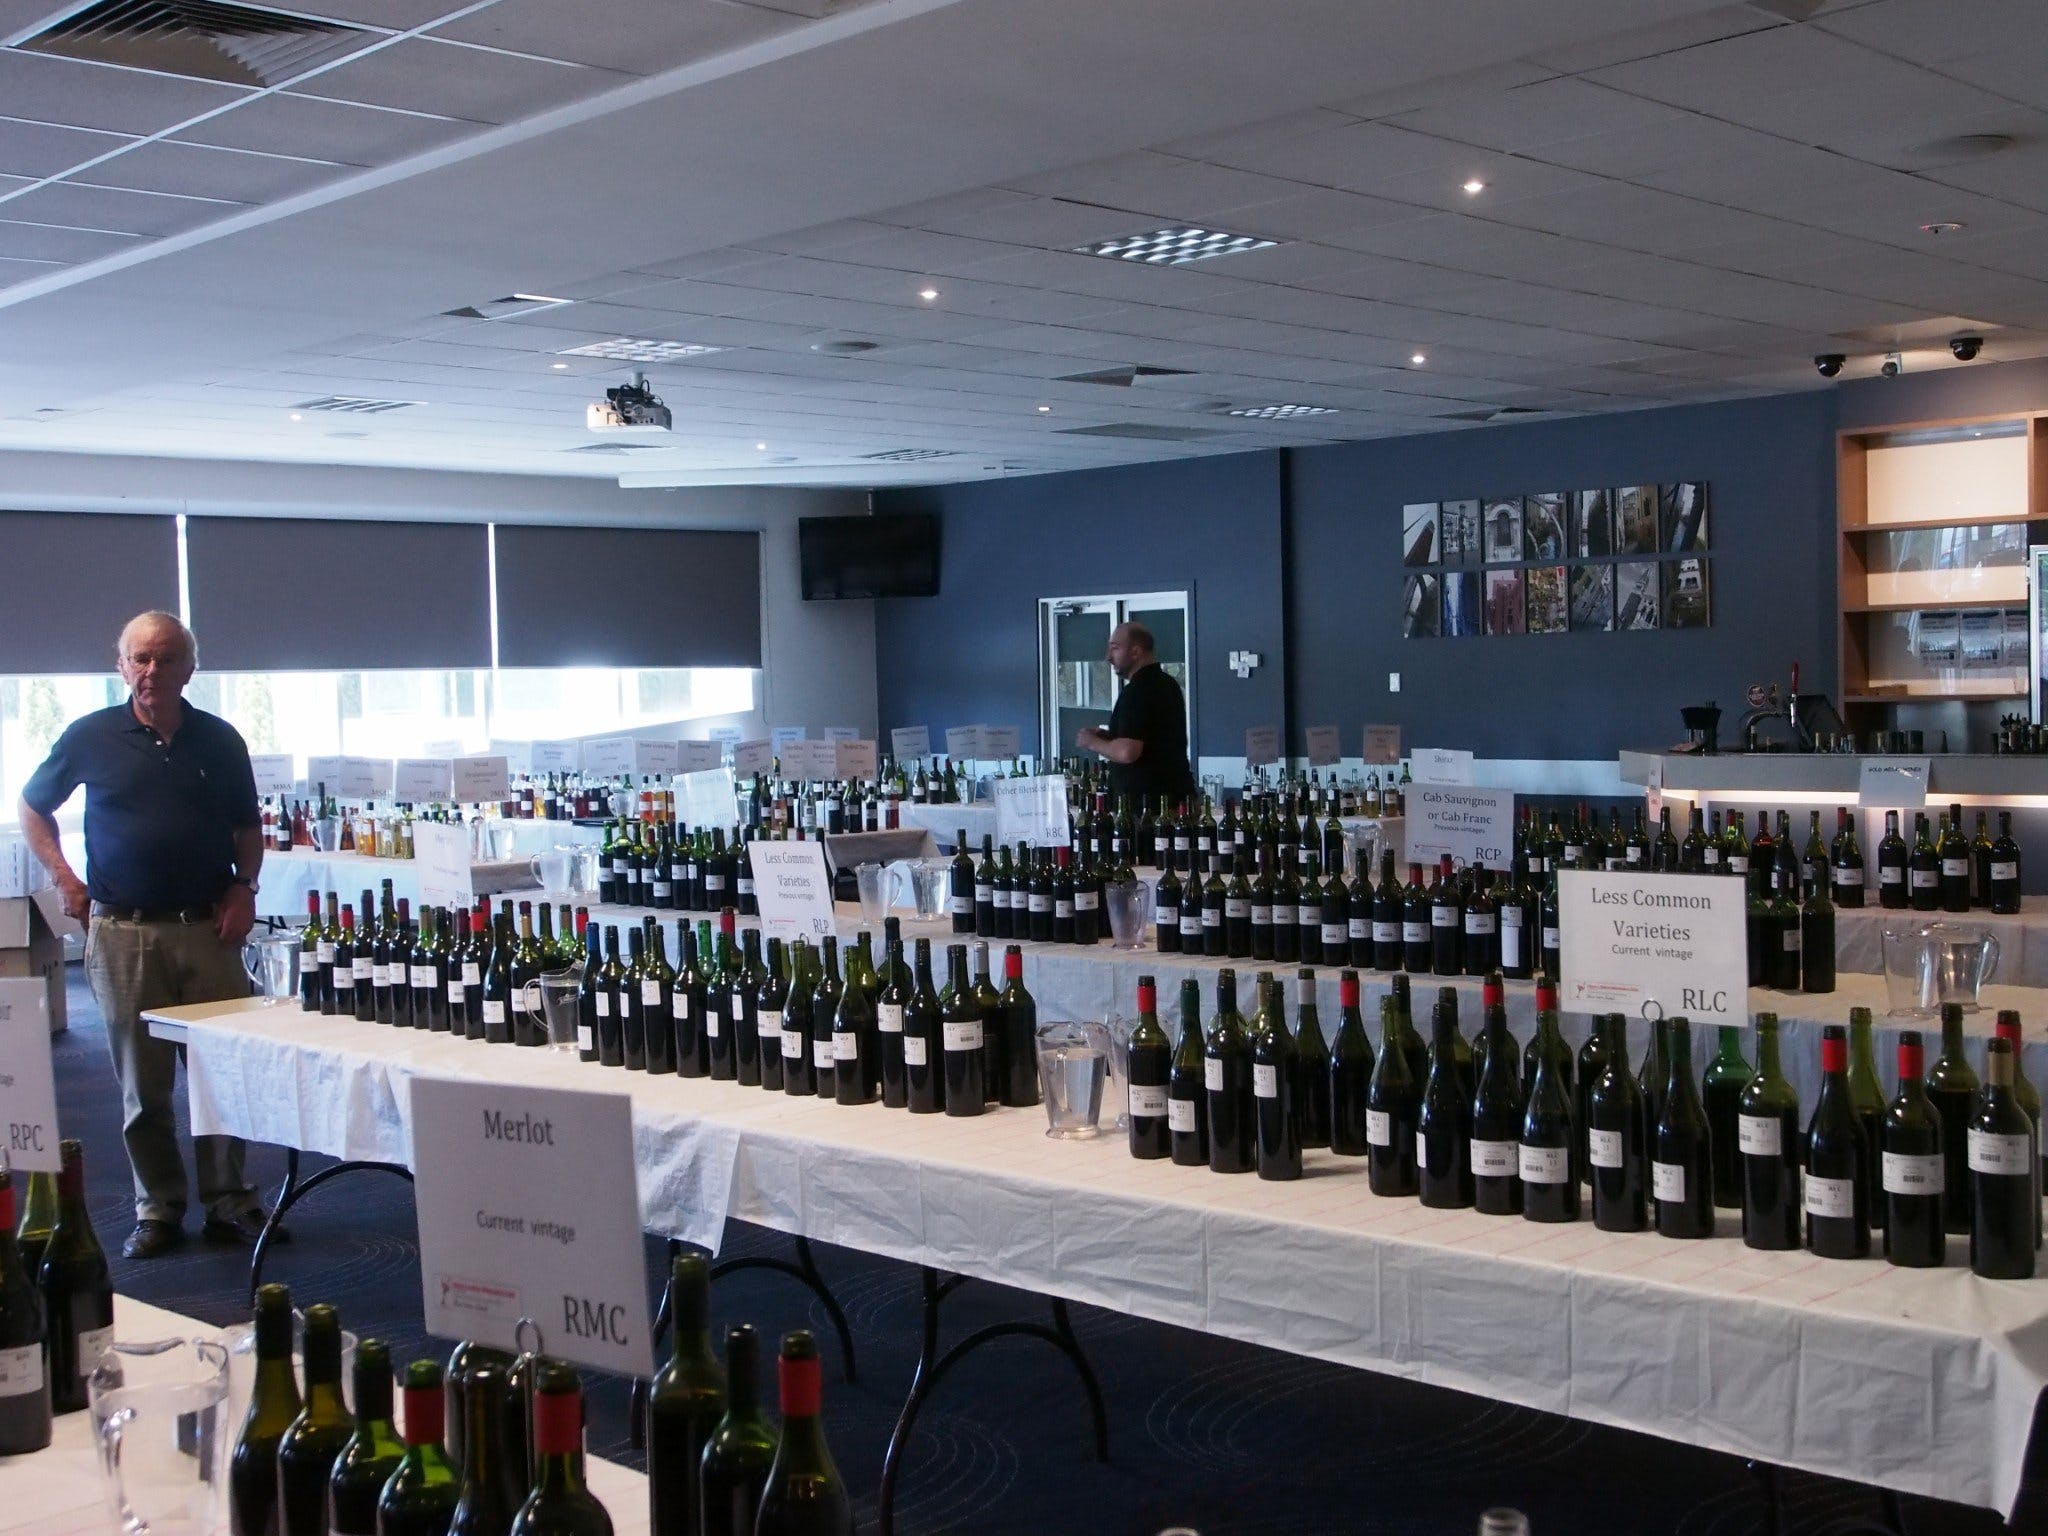 Eltham and District Wine Guild Annual Wine Show - 51st Annual Show - Yamba Accommodation